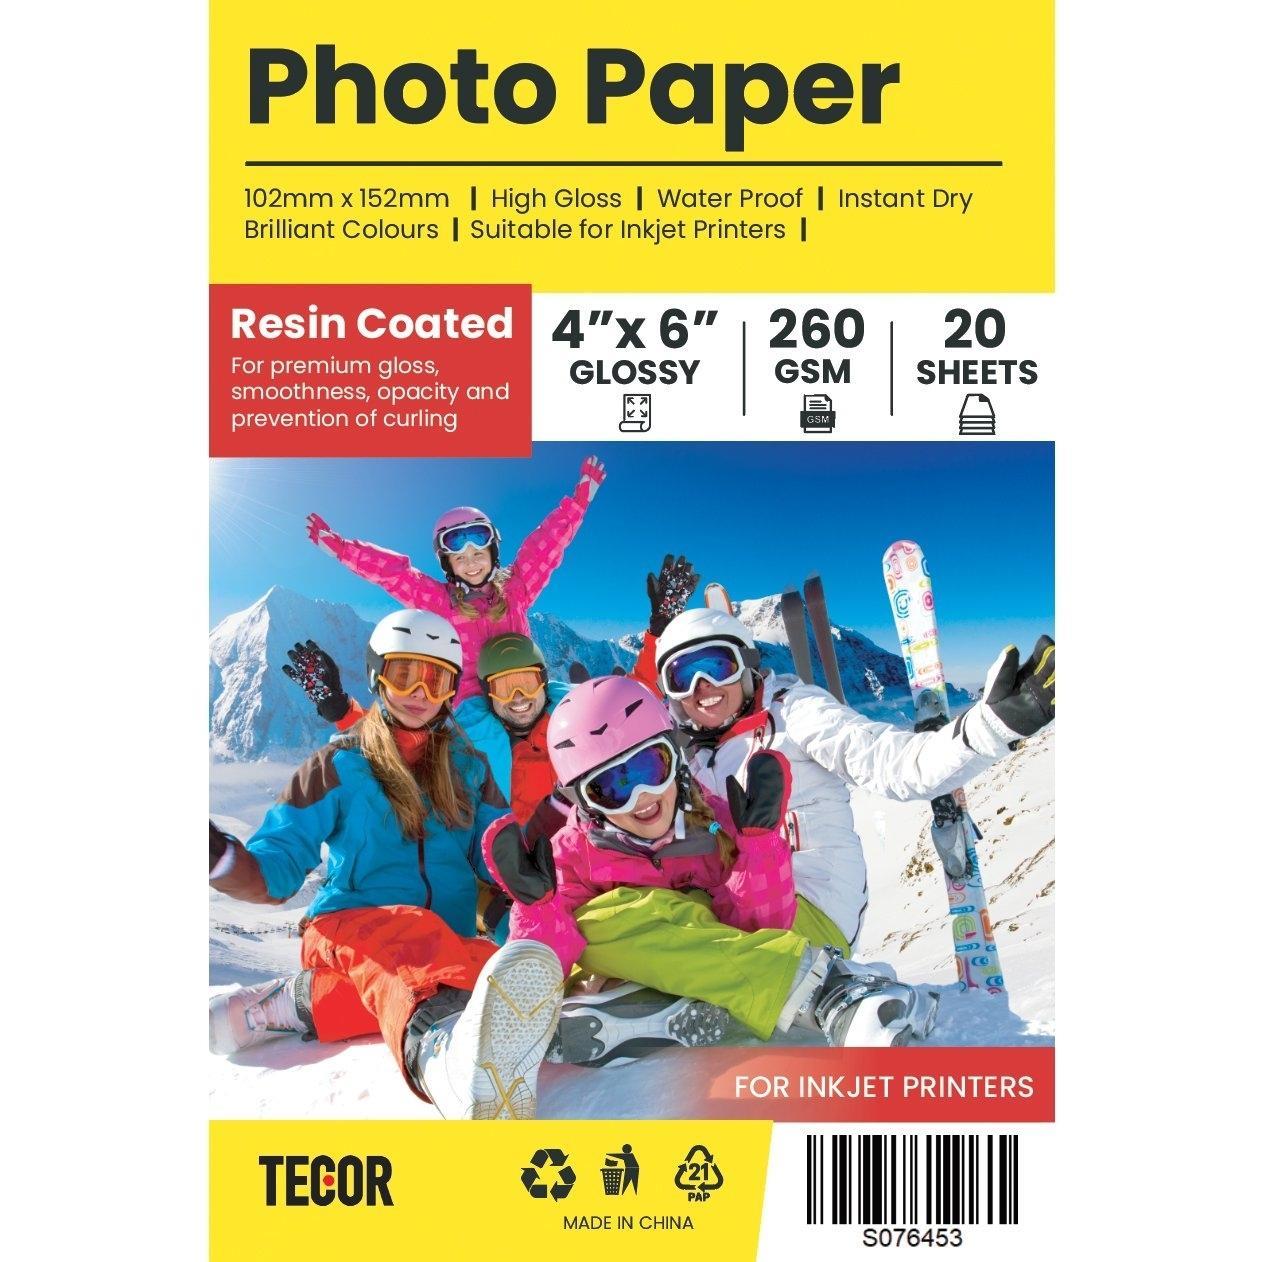 3 x Photographic Quality Resin Coated Premium Glossy Photo Paper 260GSM 4 x 6 inches for Inkjet Printers - 20 sheets per pack (60 sheets in total)